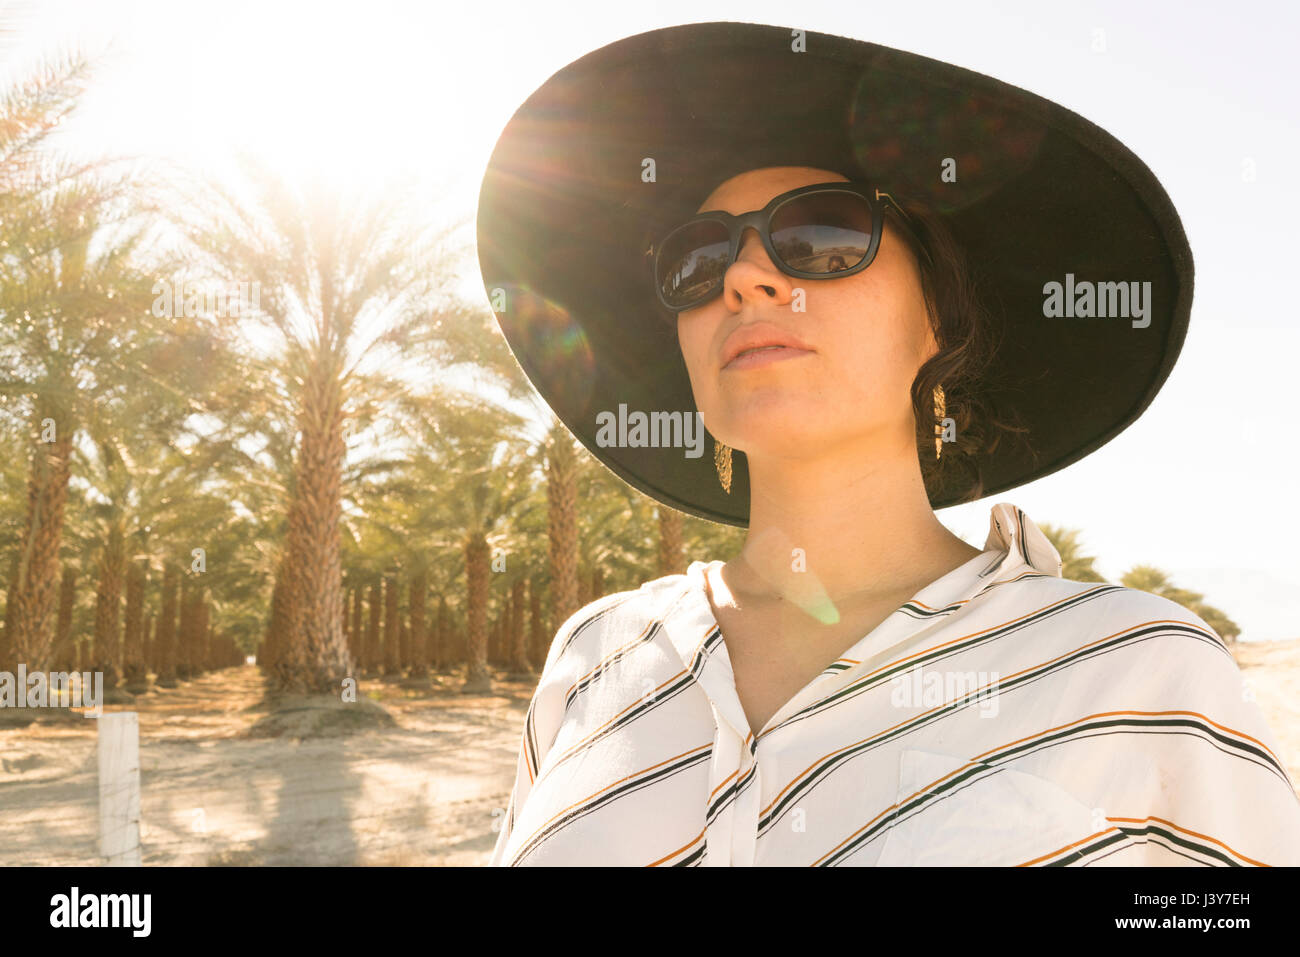 Portrait of woman wearing sunglasses and sunhat looking away, Palm Springs, California, USA Stock Photo